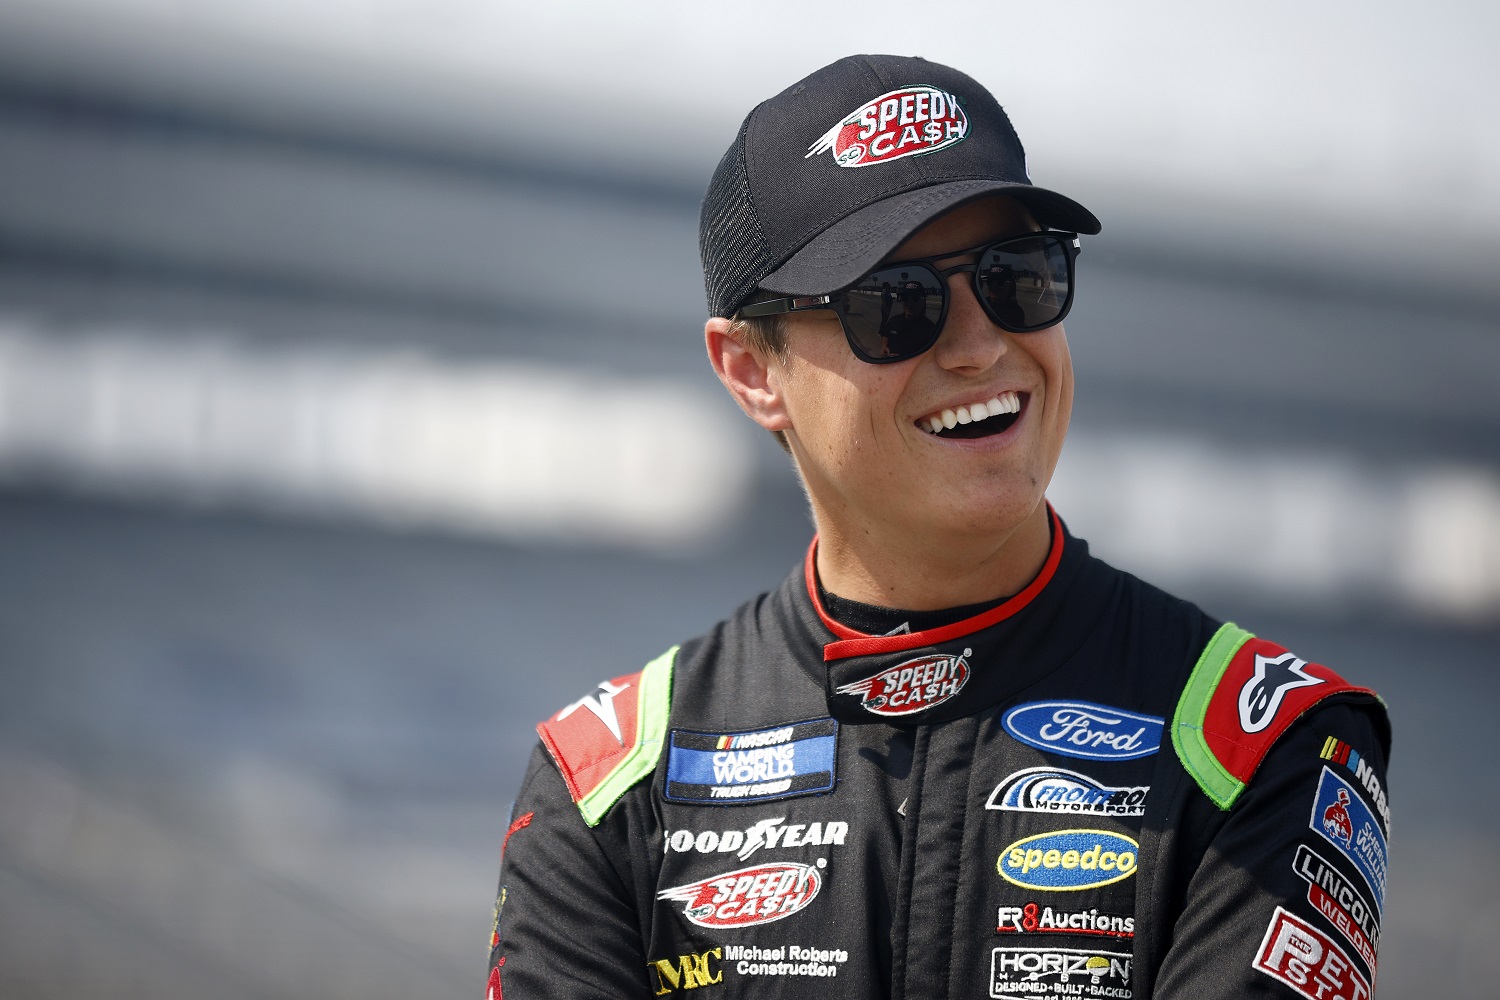 Zane Smith smiles on the grid during qualifying for the NASCAR Camping World Truck Series SpeedyCash.com 220 at Texas Motor Speedway on May 20, 2022 in Fort Worth, Texas. | Jared C. Tilton/Getty Images